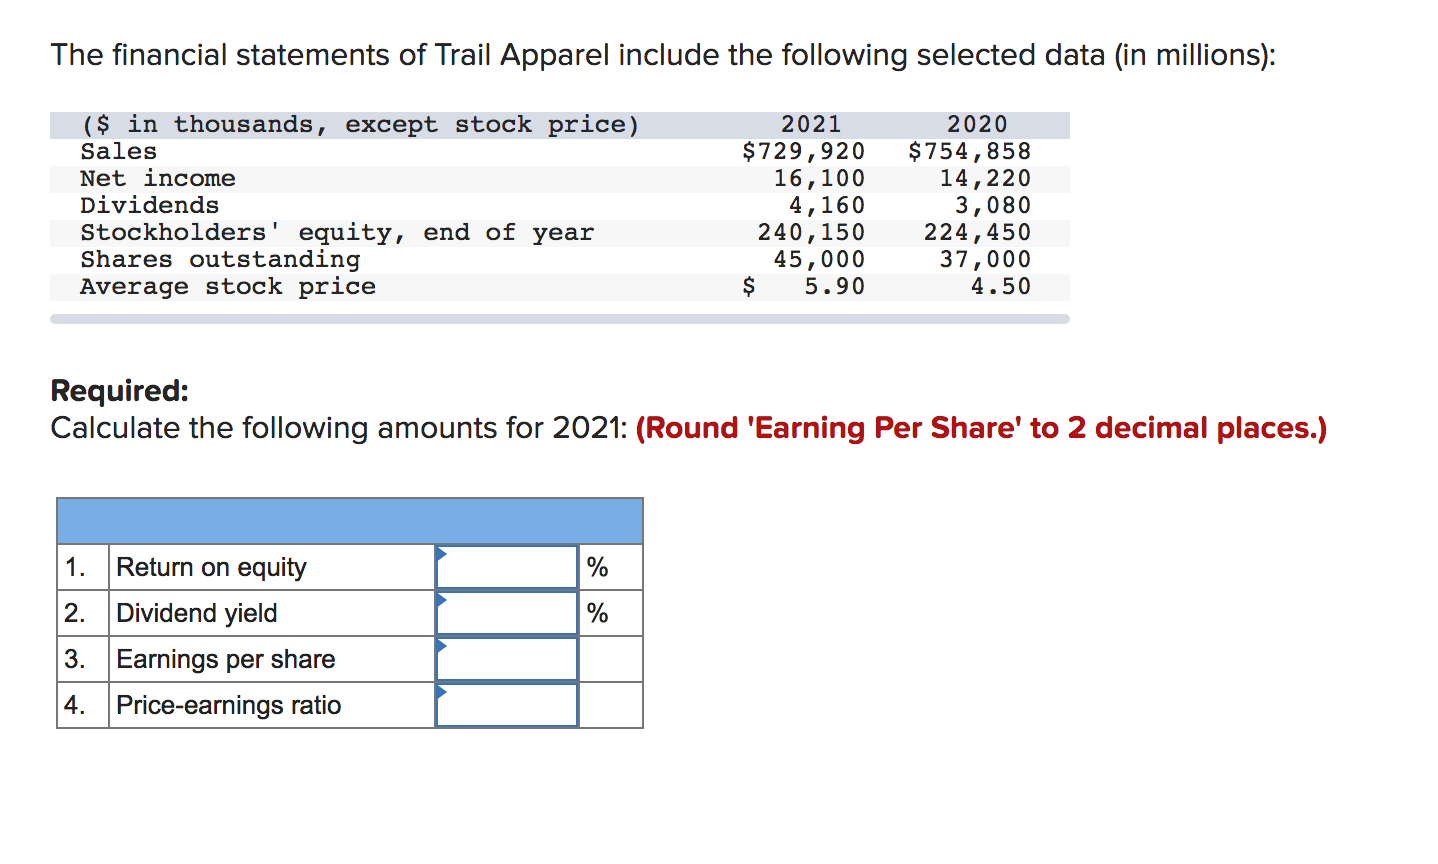 The financial statements of Trail Apparel include the following selected data (in millions):
($ in thousands, except stock price)
Sales
2020
2021
$729,920
16,100
4,160
240,150
45,000
5.90
$754,858
14,220
3,080
224,450
37,000
4.50
Net income
Dividends
Stockholders' equity, end of year
Shares outstanding
Average stock price
$
Required:
Calculate the following amounts for 2021: (Round 'Earning Per Share' to 2 decimal places.)
Return on equity
1
Dividend yield
2.
3. Earnings per share
4. Price-earnings ratio
